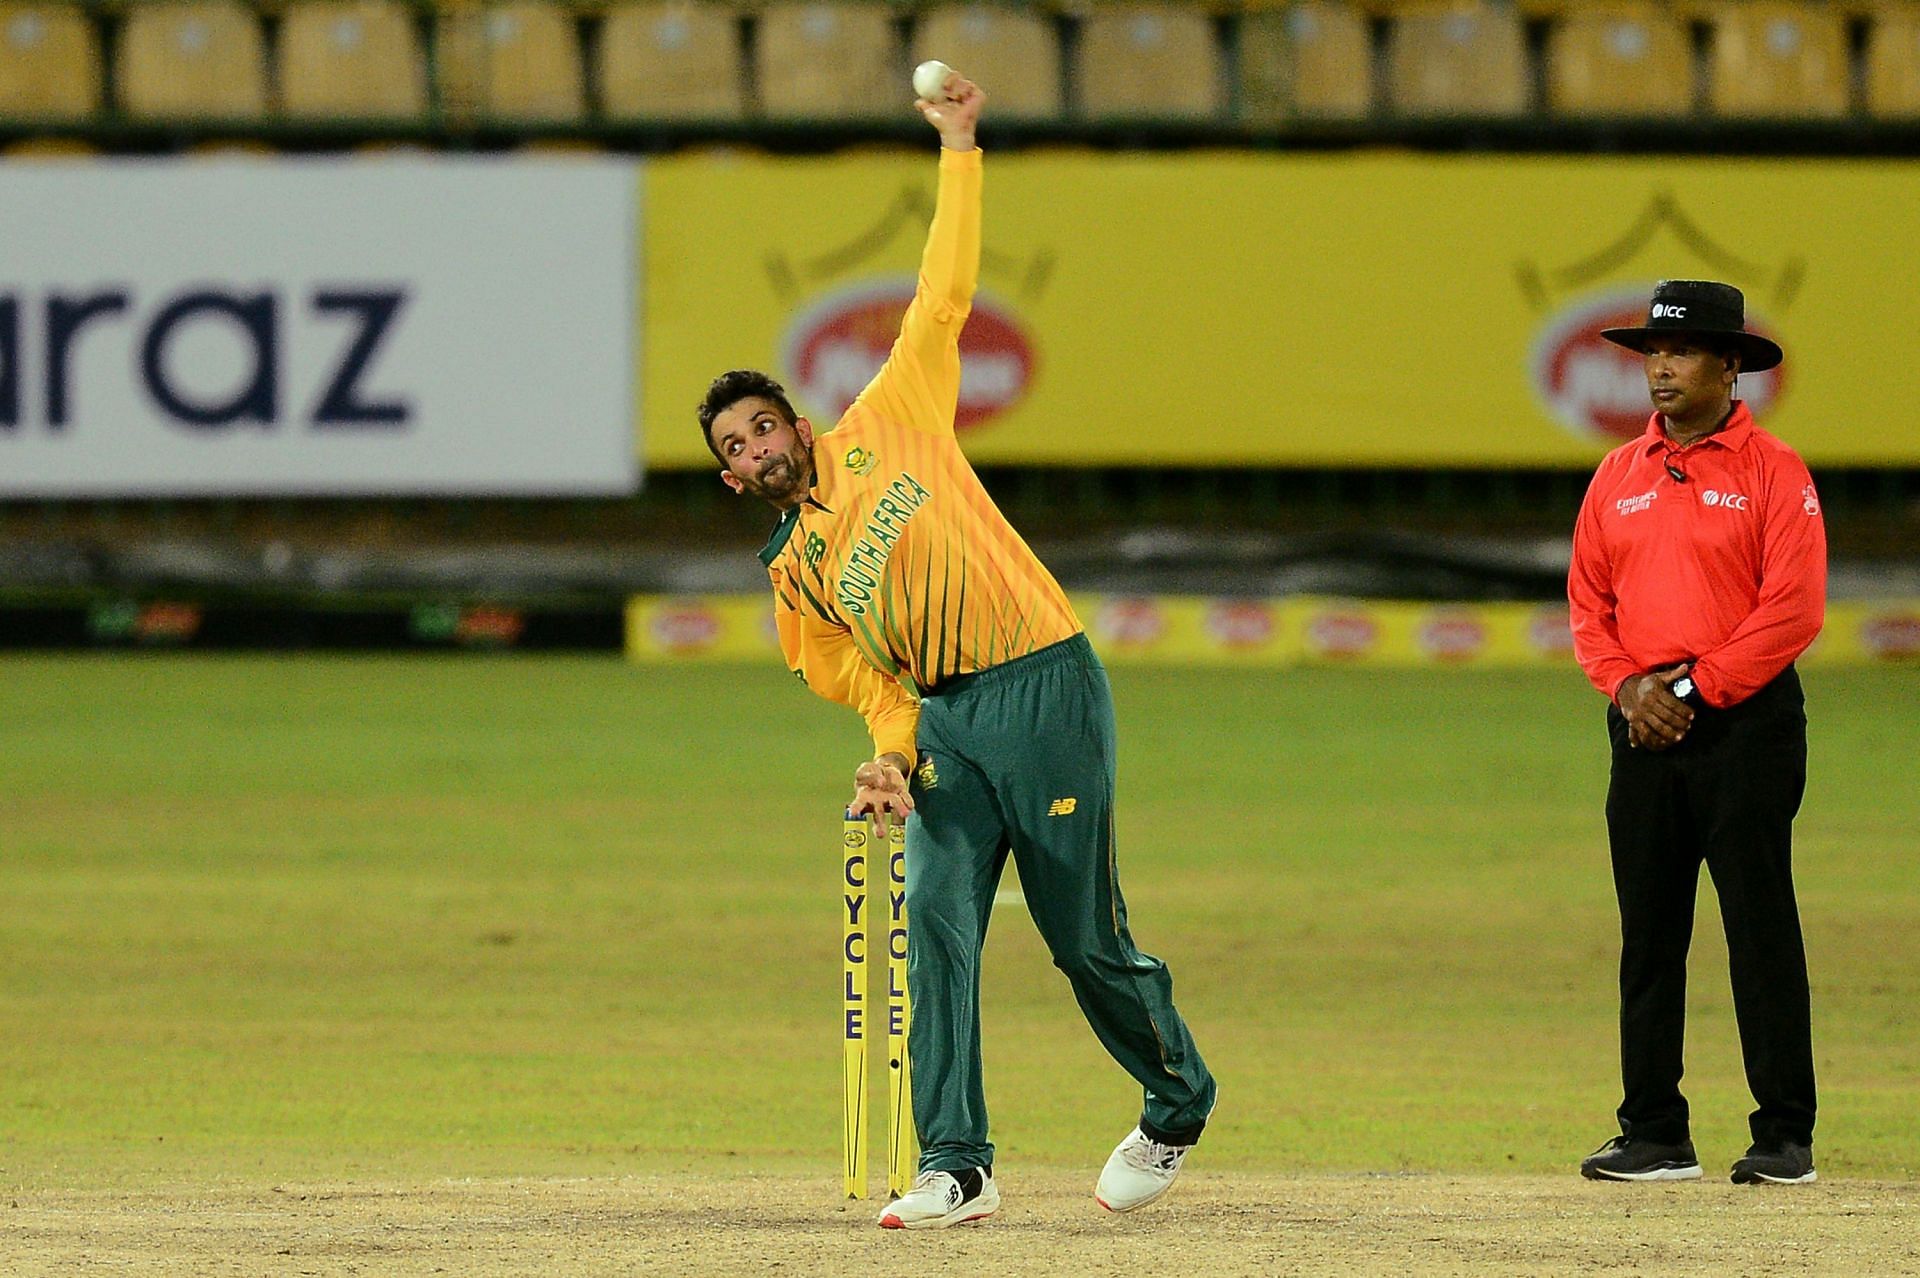 Keshav Maharaj has played just eight T20Is for South Africa.